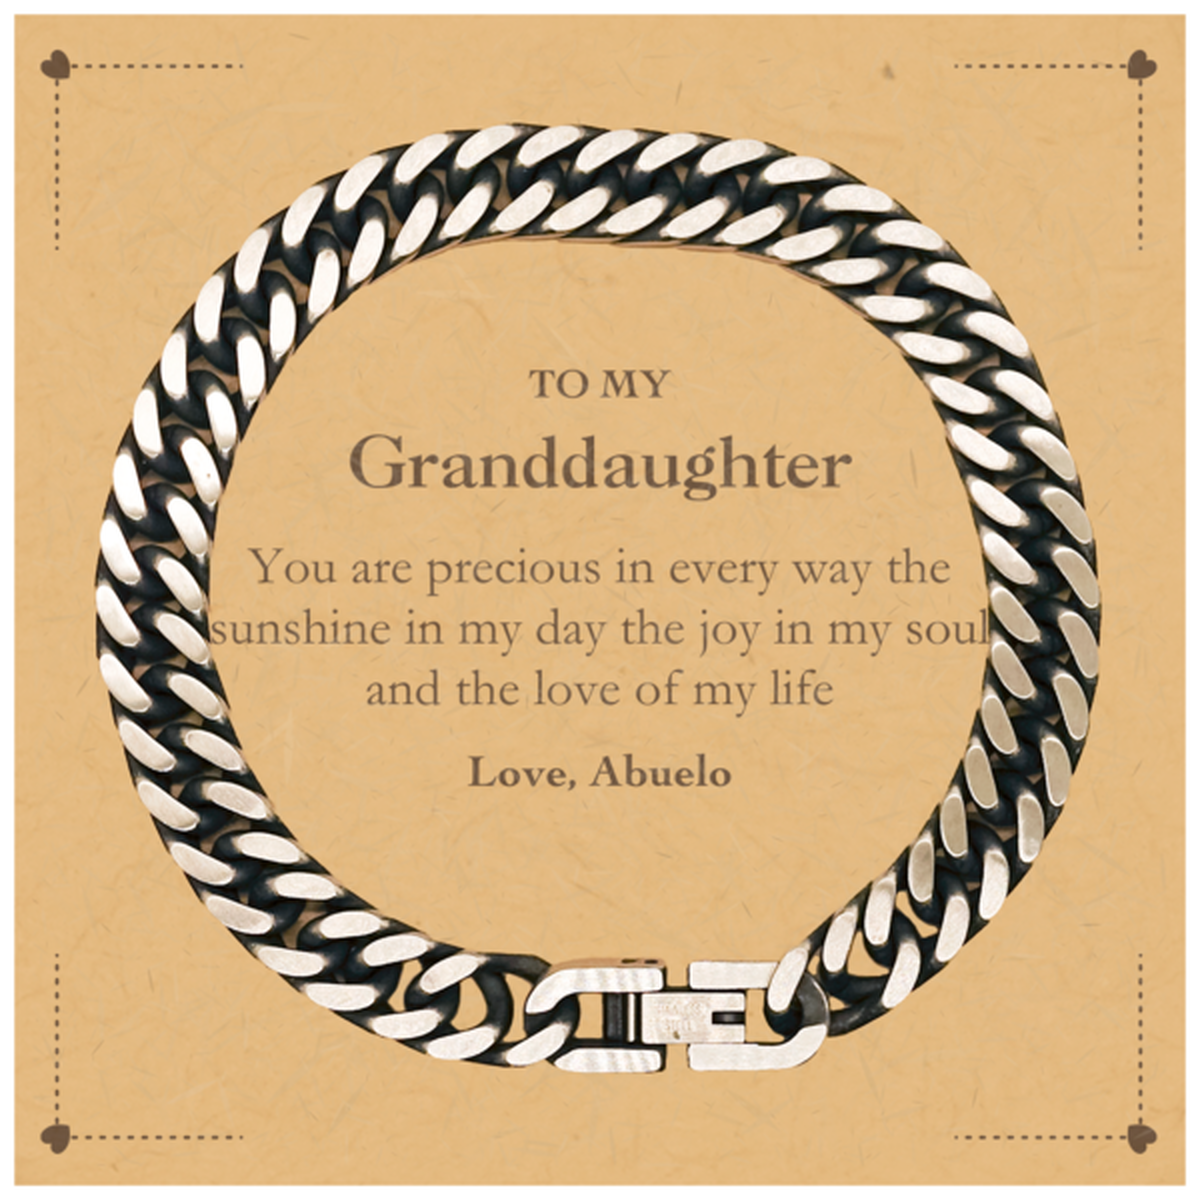 Graduation Gifts for Granddaughter Cuban Link Chain Bracelet Present from Abuelo, Christmas Granddaughter Birthday Gifts Granddaughter You are precious in every way the sunshine in my day. Love, Abuelo